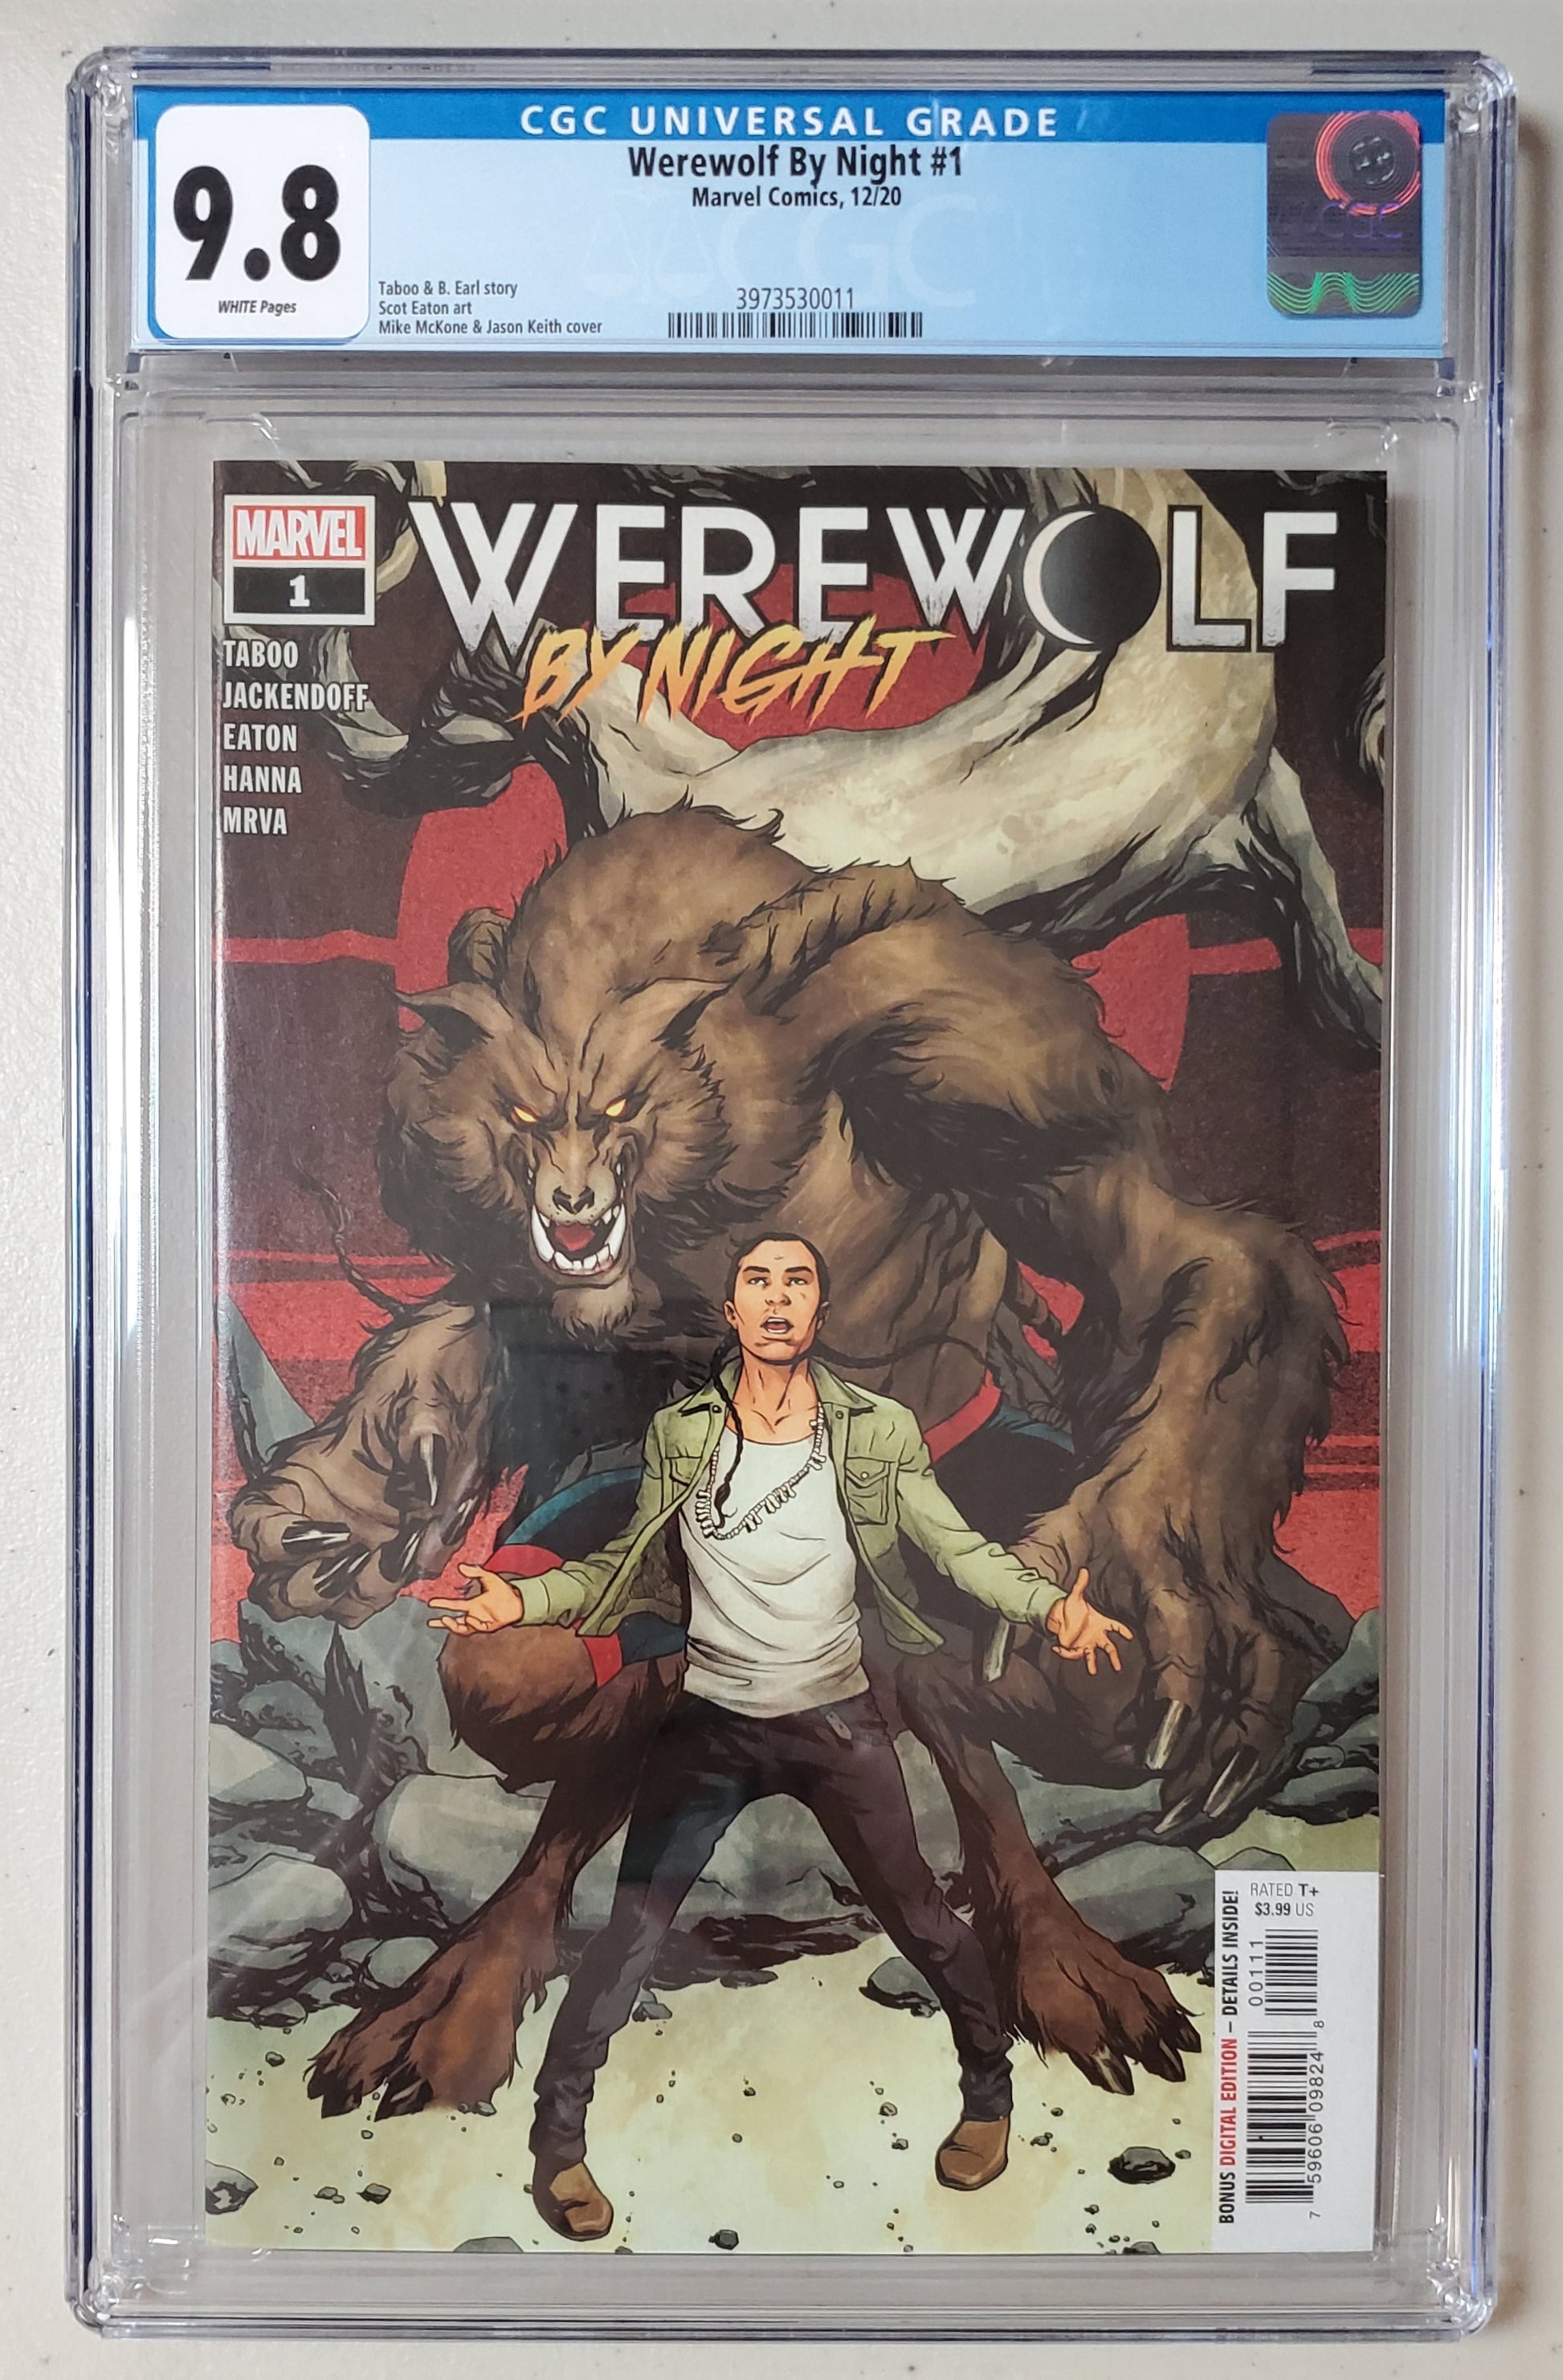 Werewolf By Night #1 CGC 9.8 - Legacy Comics and Cards